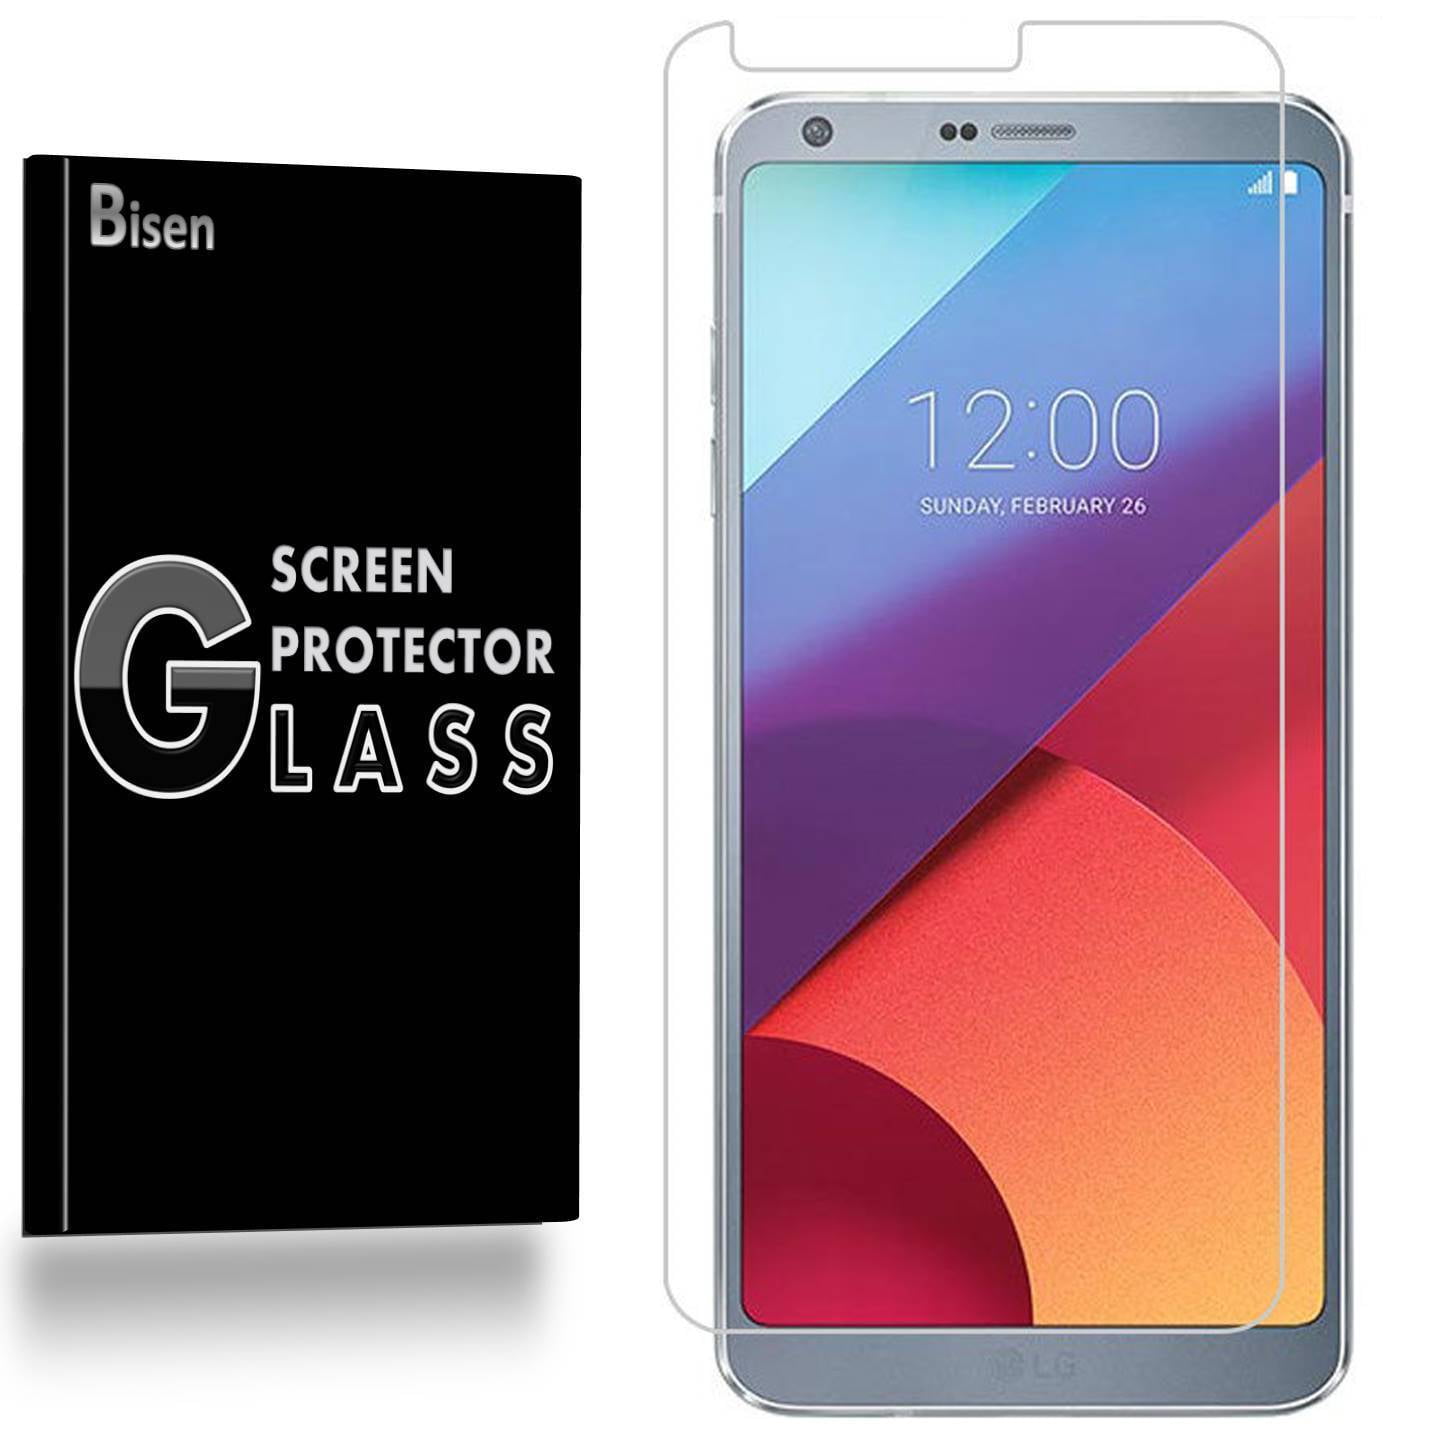 Bubble Free 3 Pack The Grafu Screen Protector Tempered Glass for LG G6 9H Scratch Resistant Screen Protector Film for LG G6 